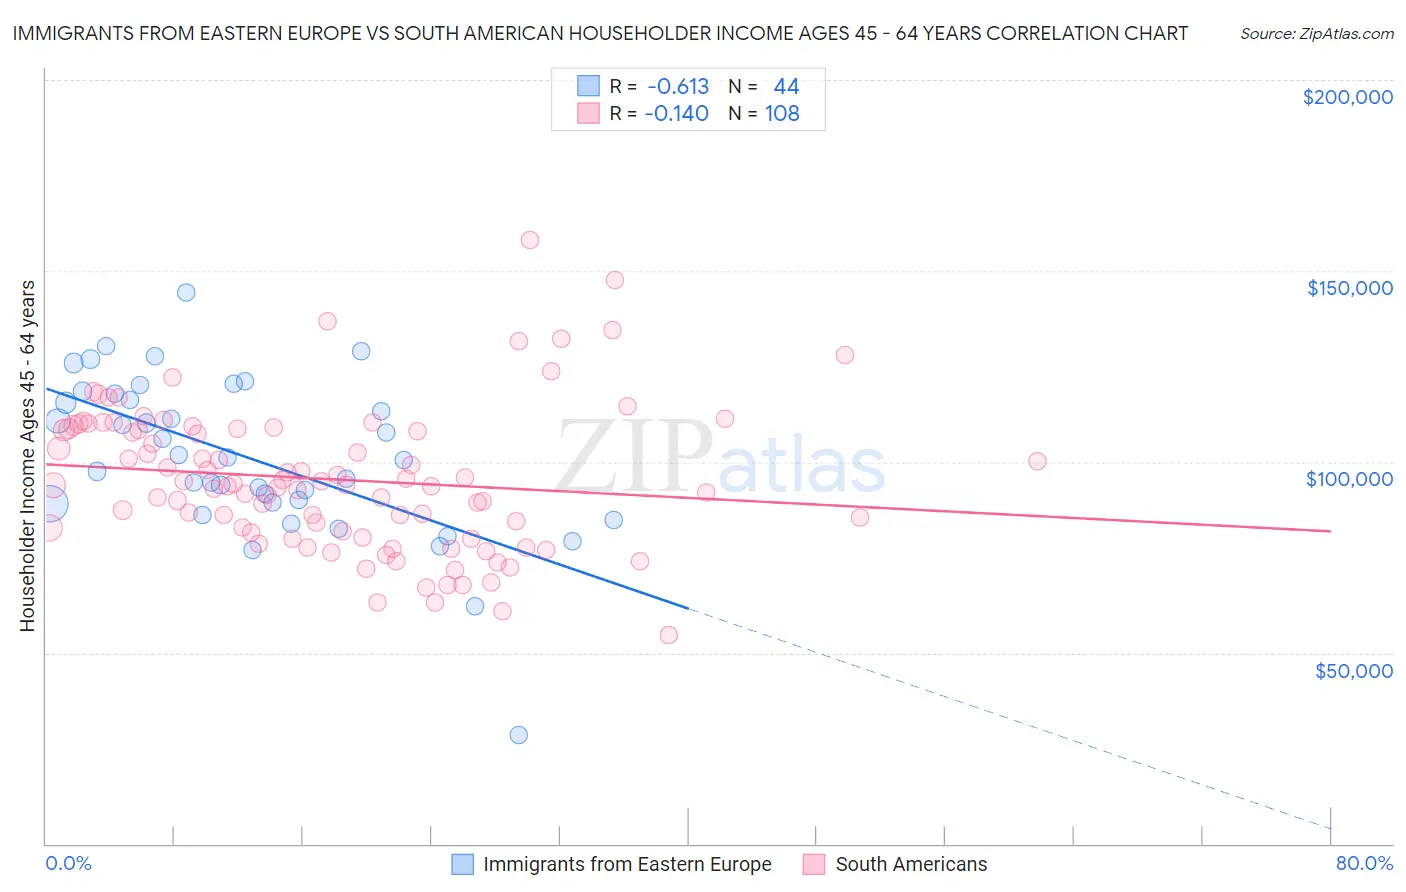 Immigrants from Eastern Europe vs South American Householder Income Ages 45 - 64 years